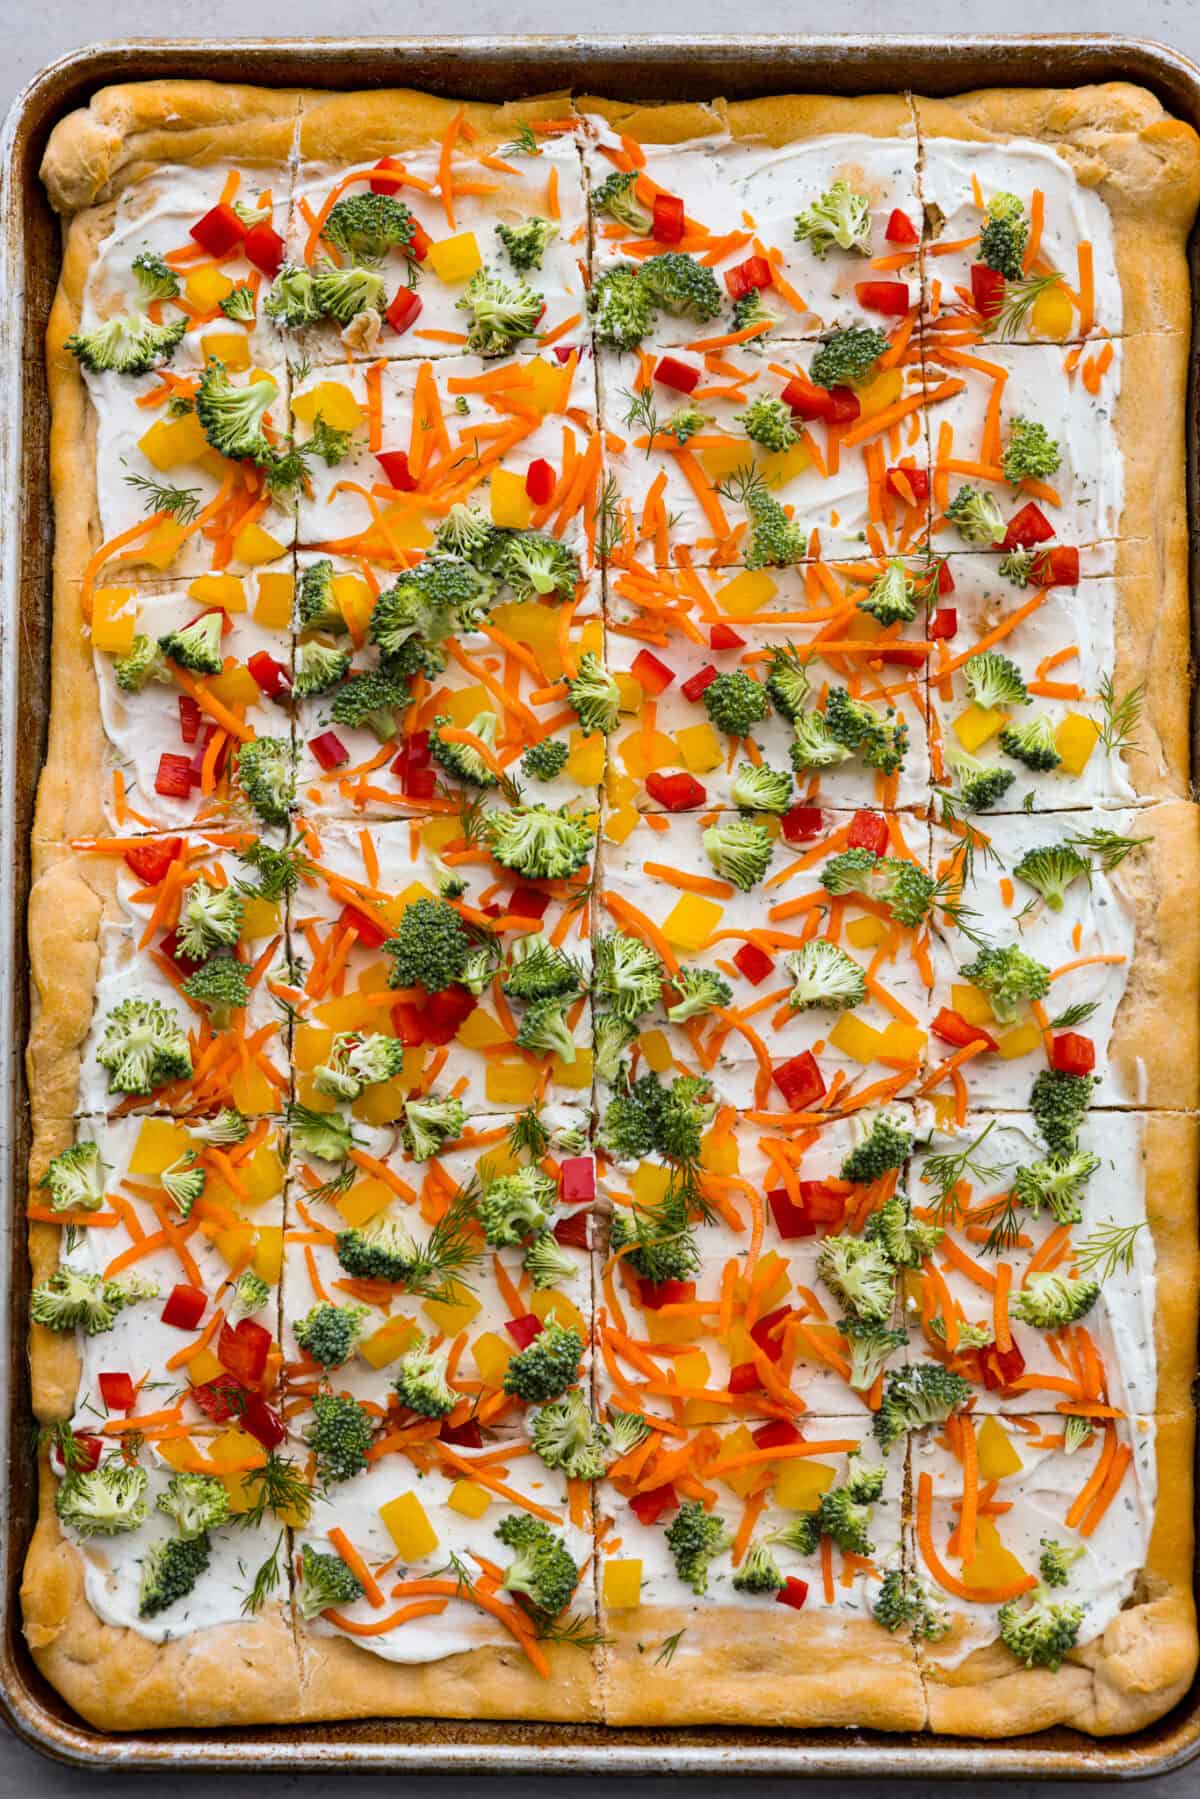 A whole vegetable pizza made from crescent roll dough, a creamy ranch spread, broccoli, shredded carrots, chopped dill, and bell peppers.